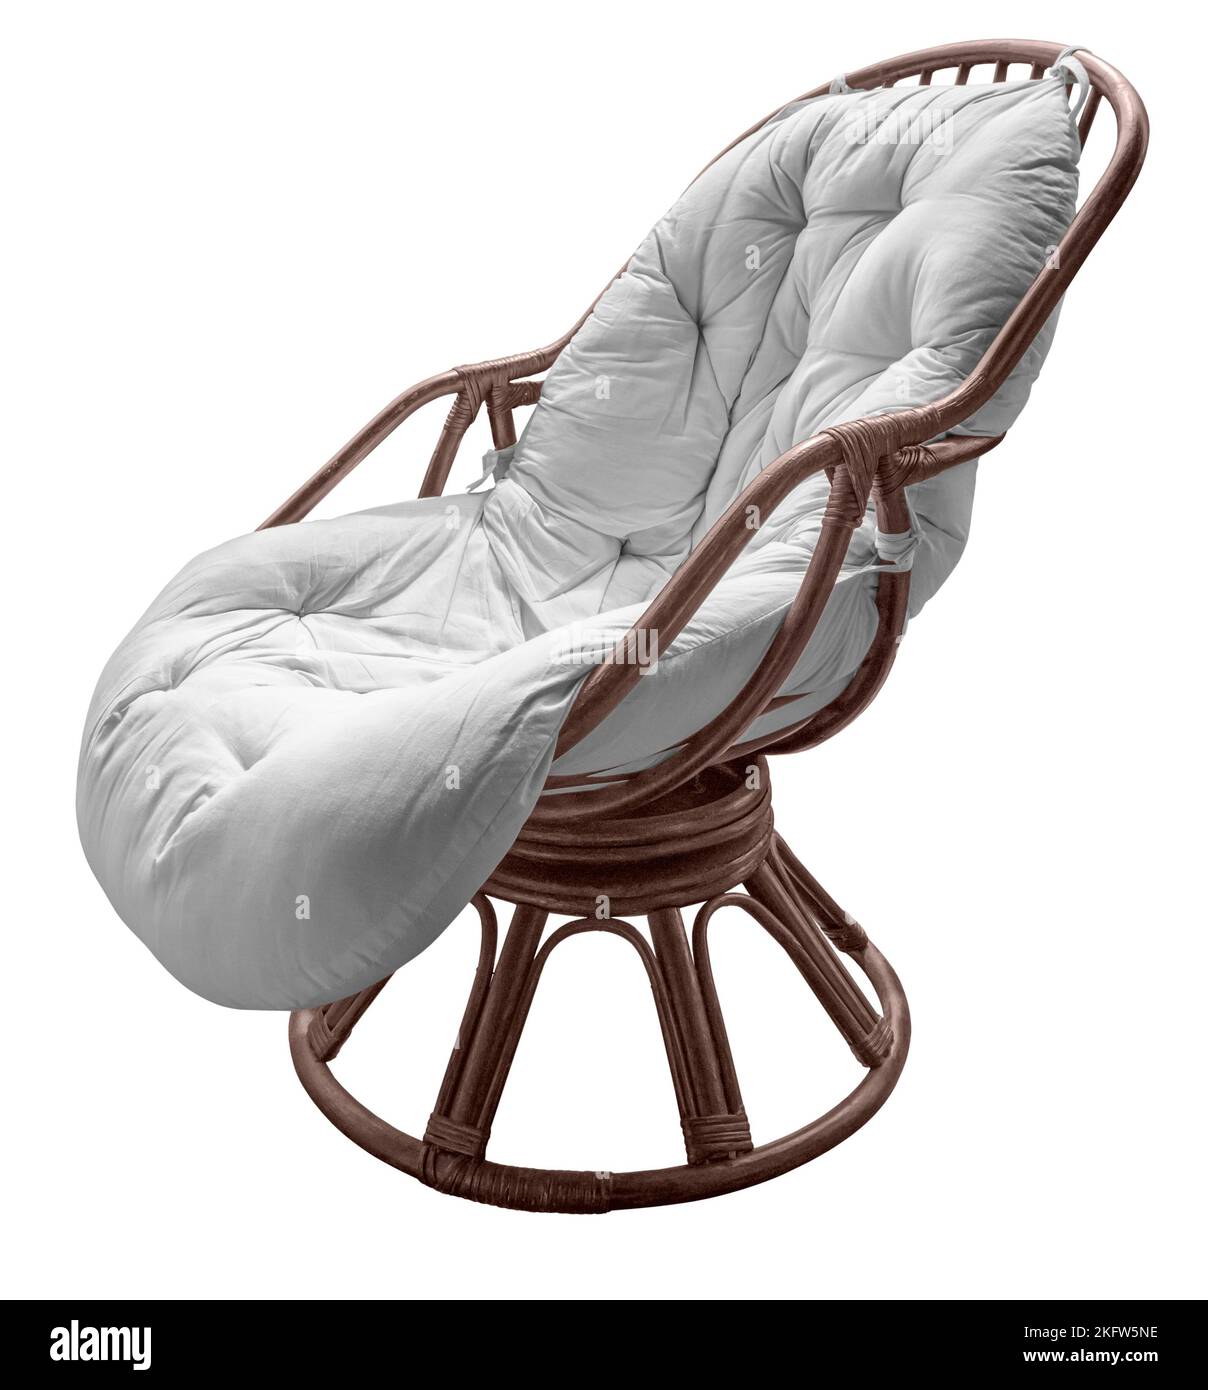 Wicker chair with cushion isolated in white back Stock Photo